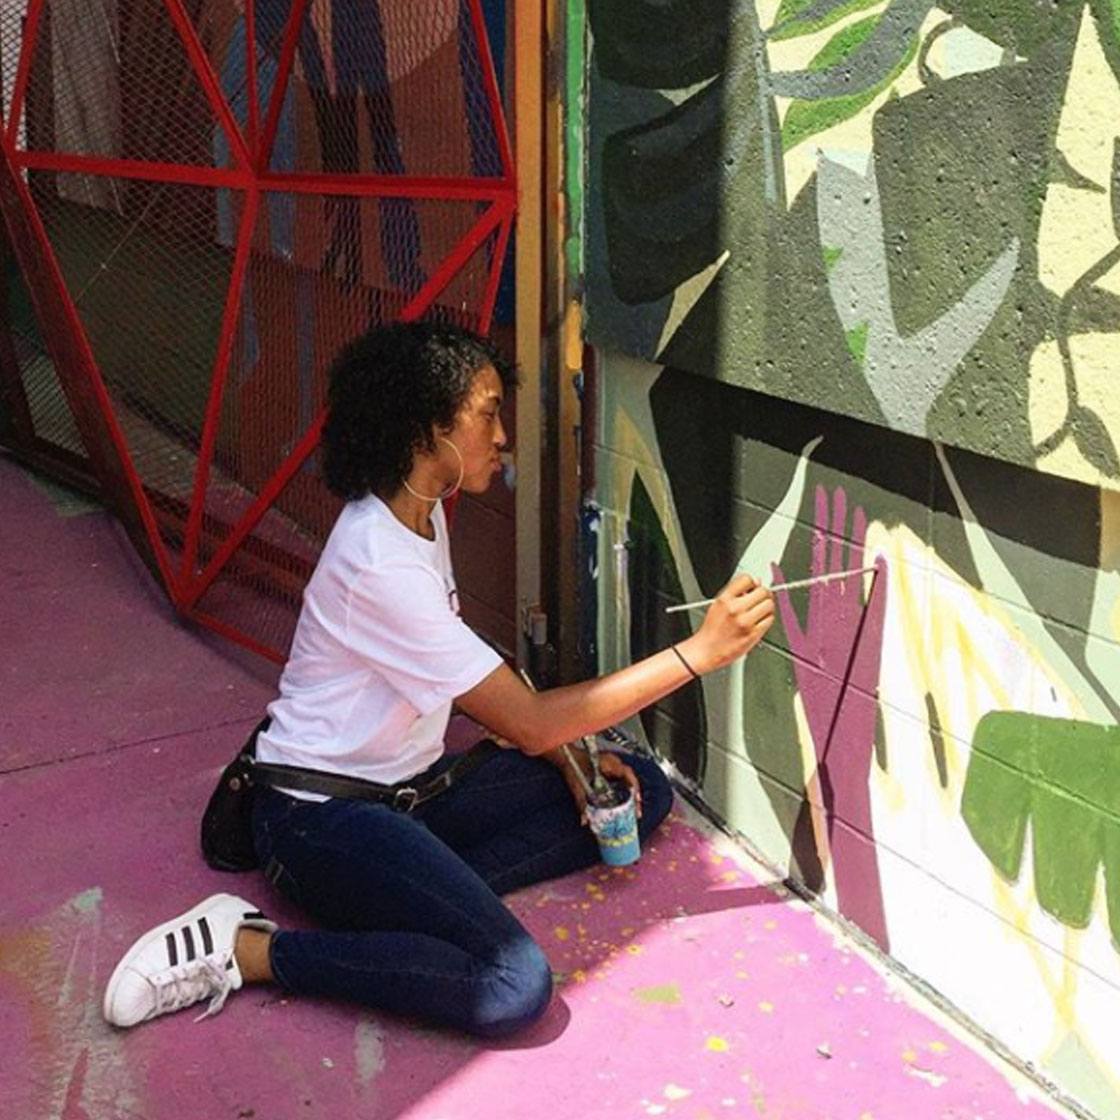 A young person painting a large-scale outdoor mural